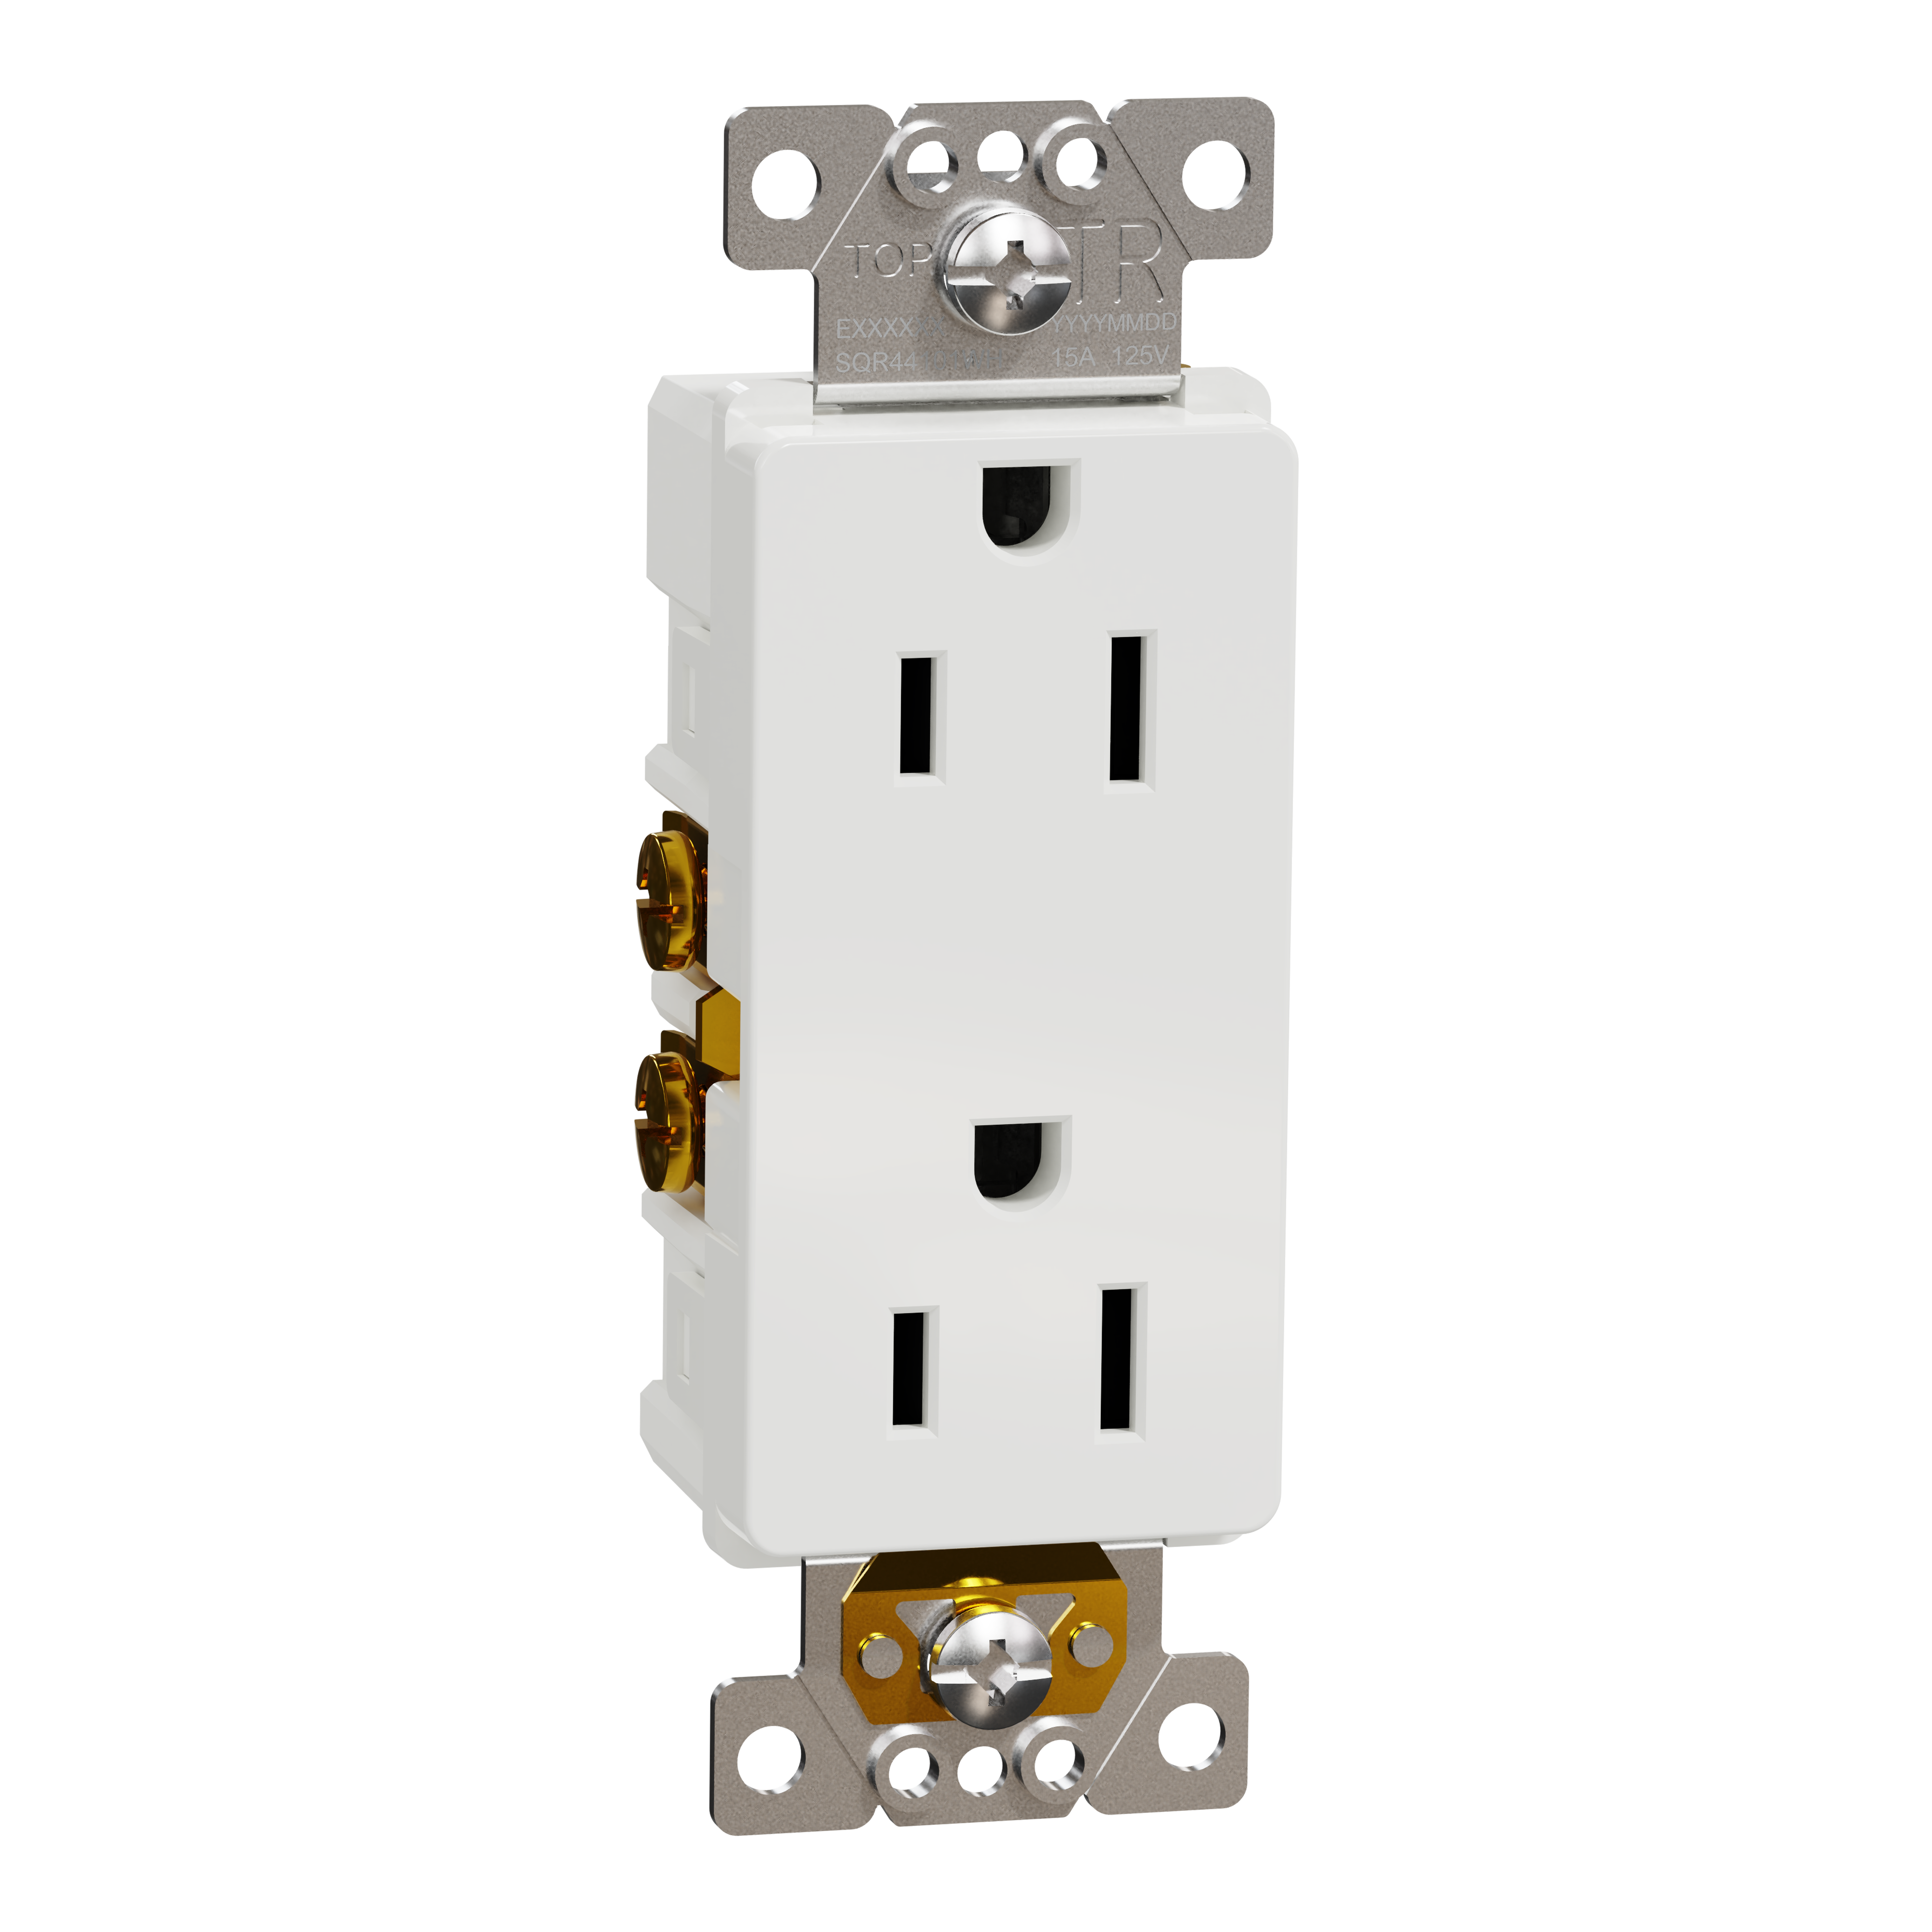 Socket-outlet, X Series, 15A, decorator, tamper resistant, residential, white, matte finish